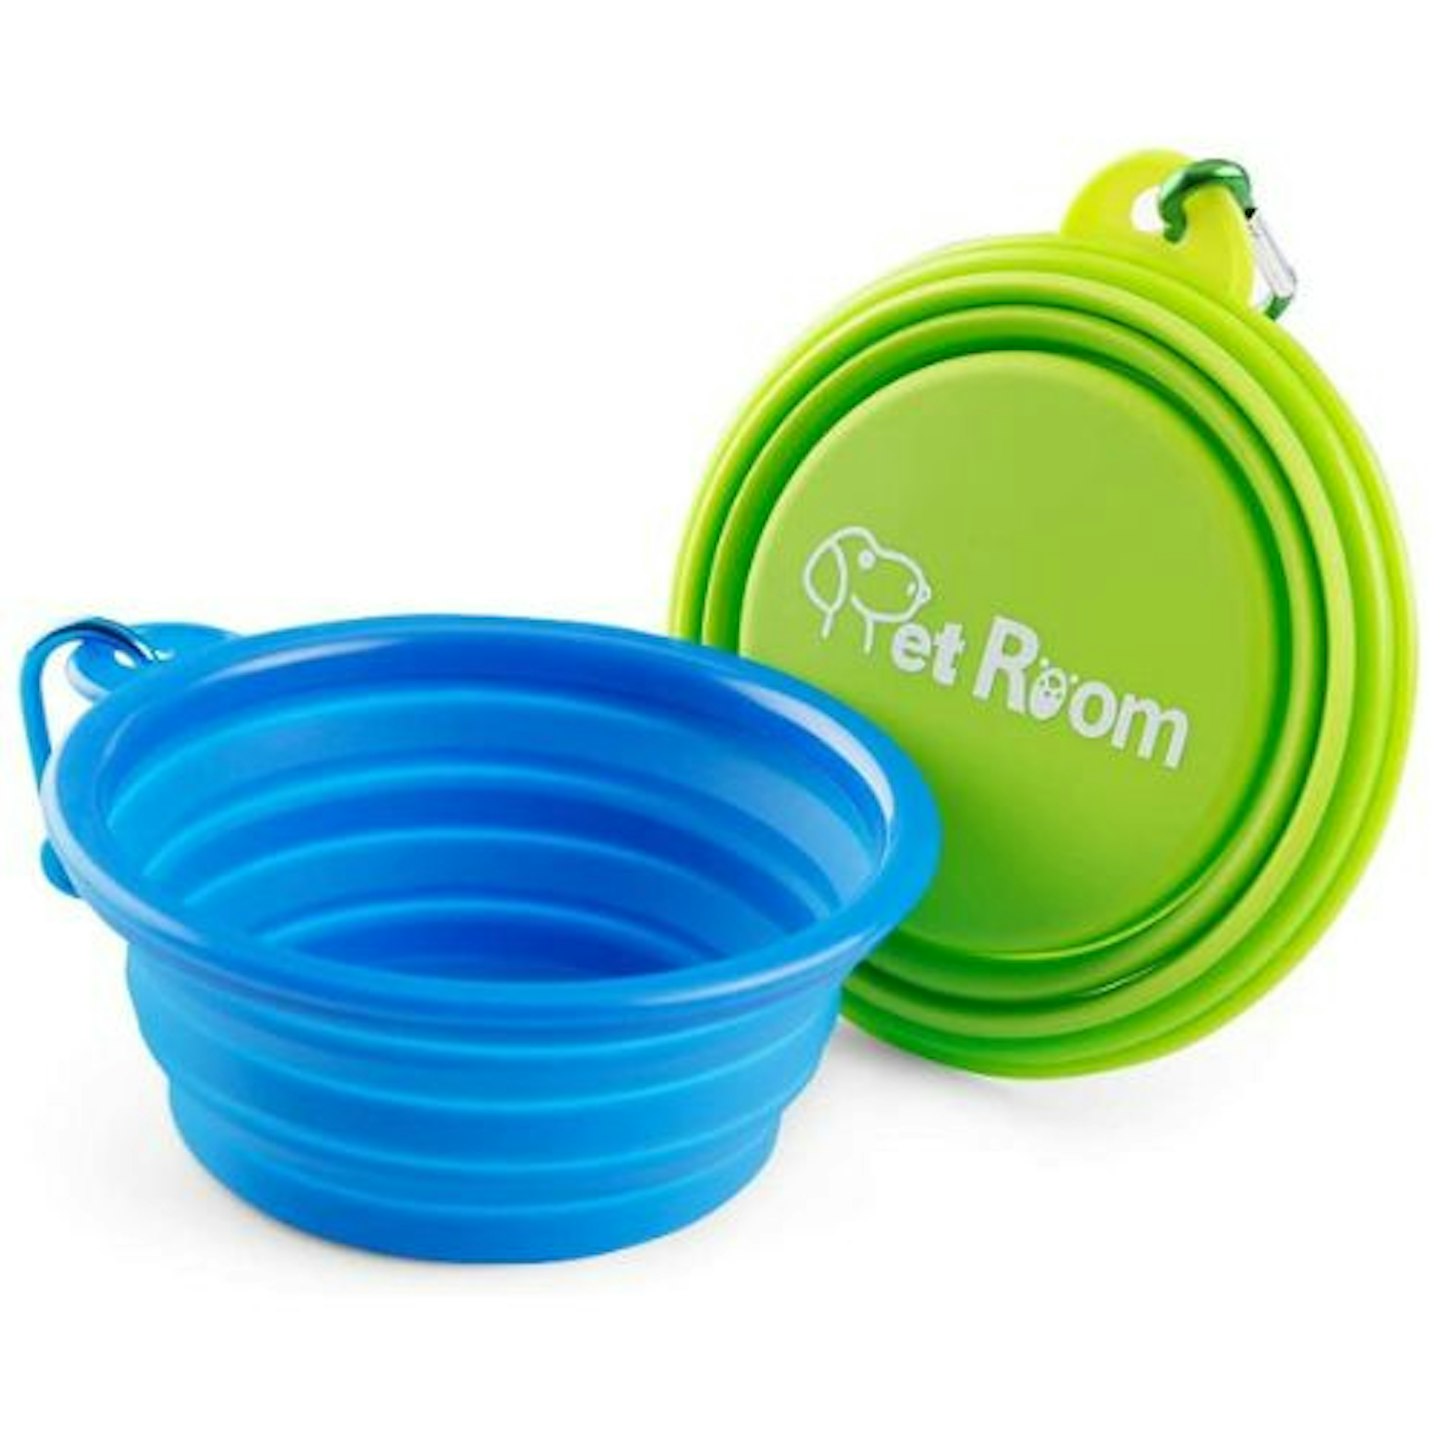 Pet Room Collapsible Portable Dog Bowls